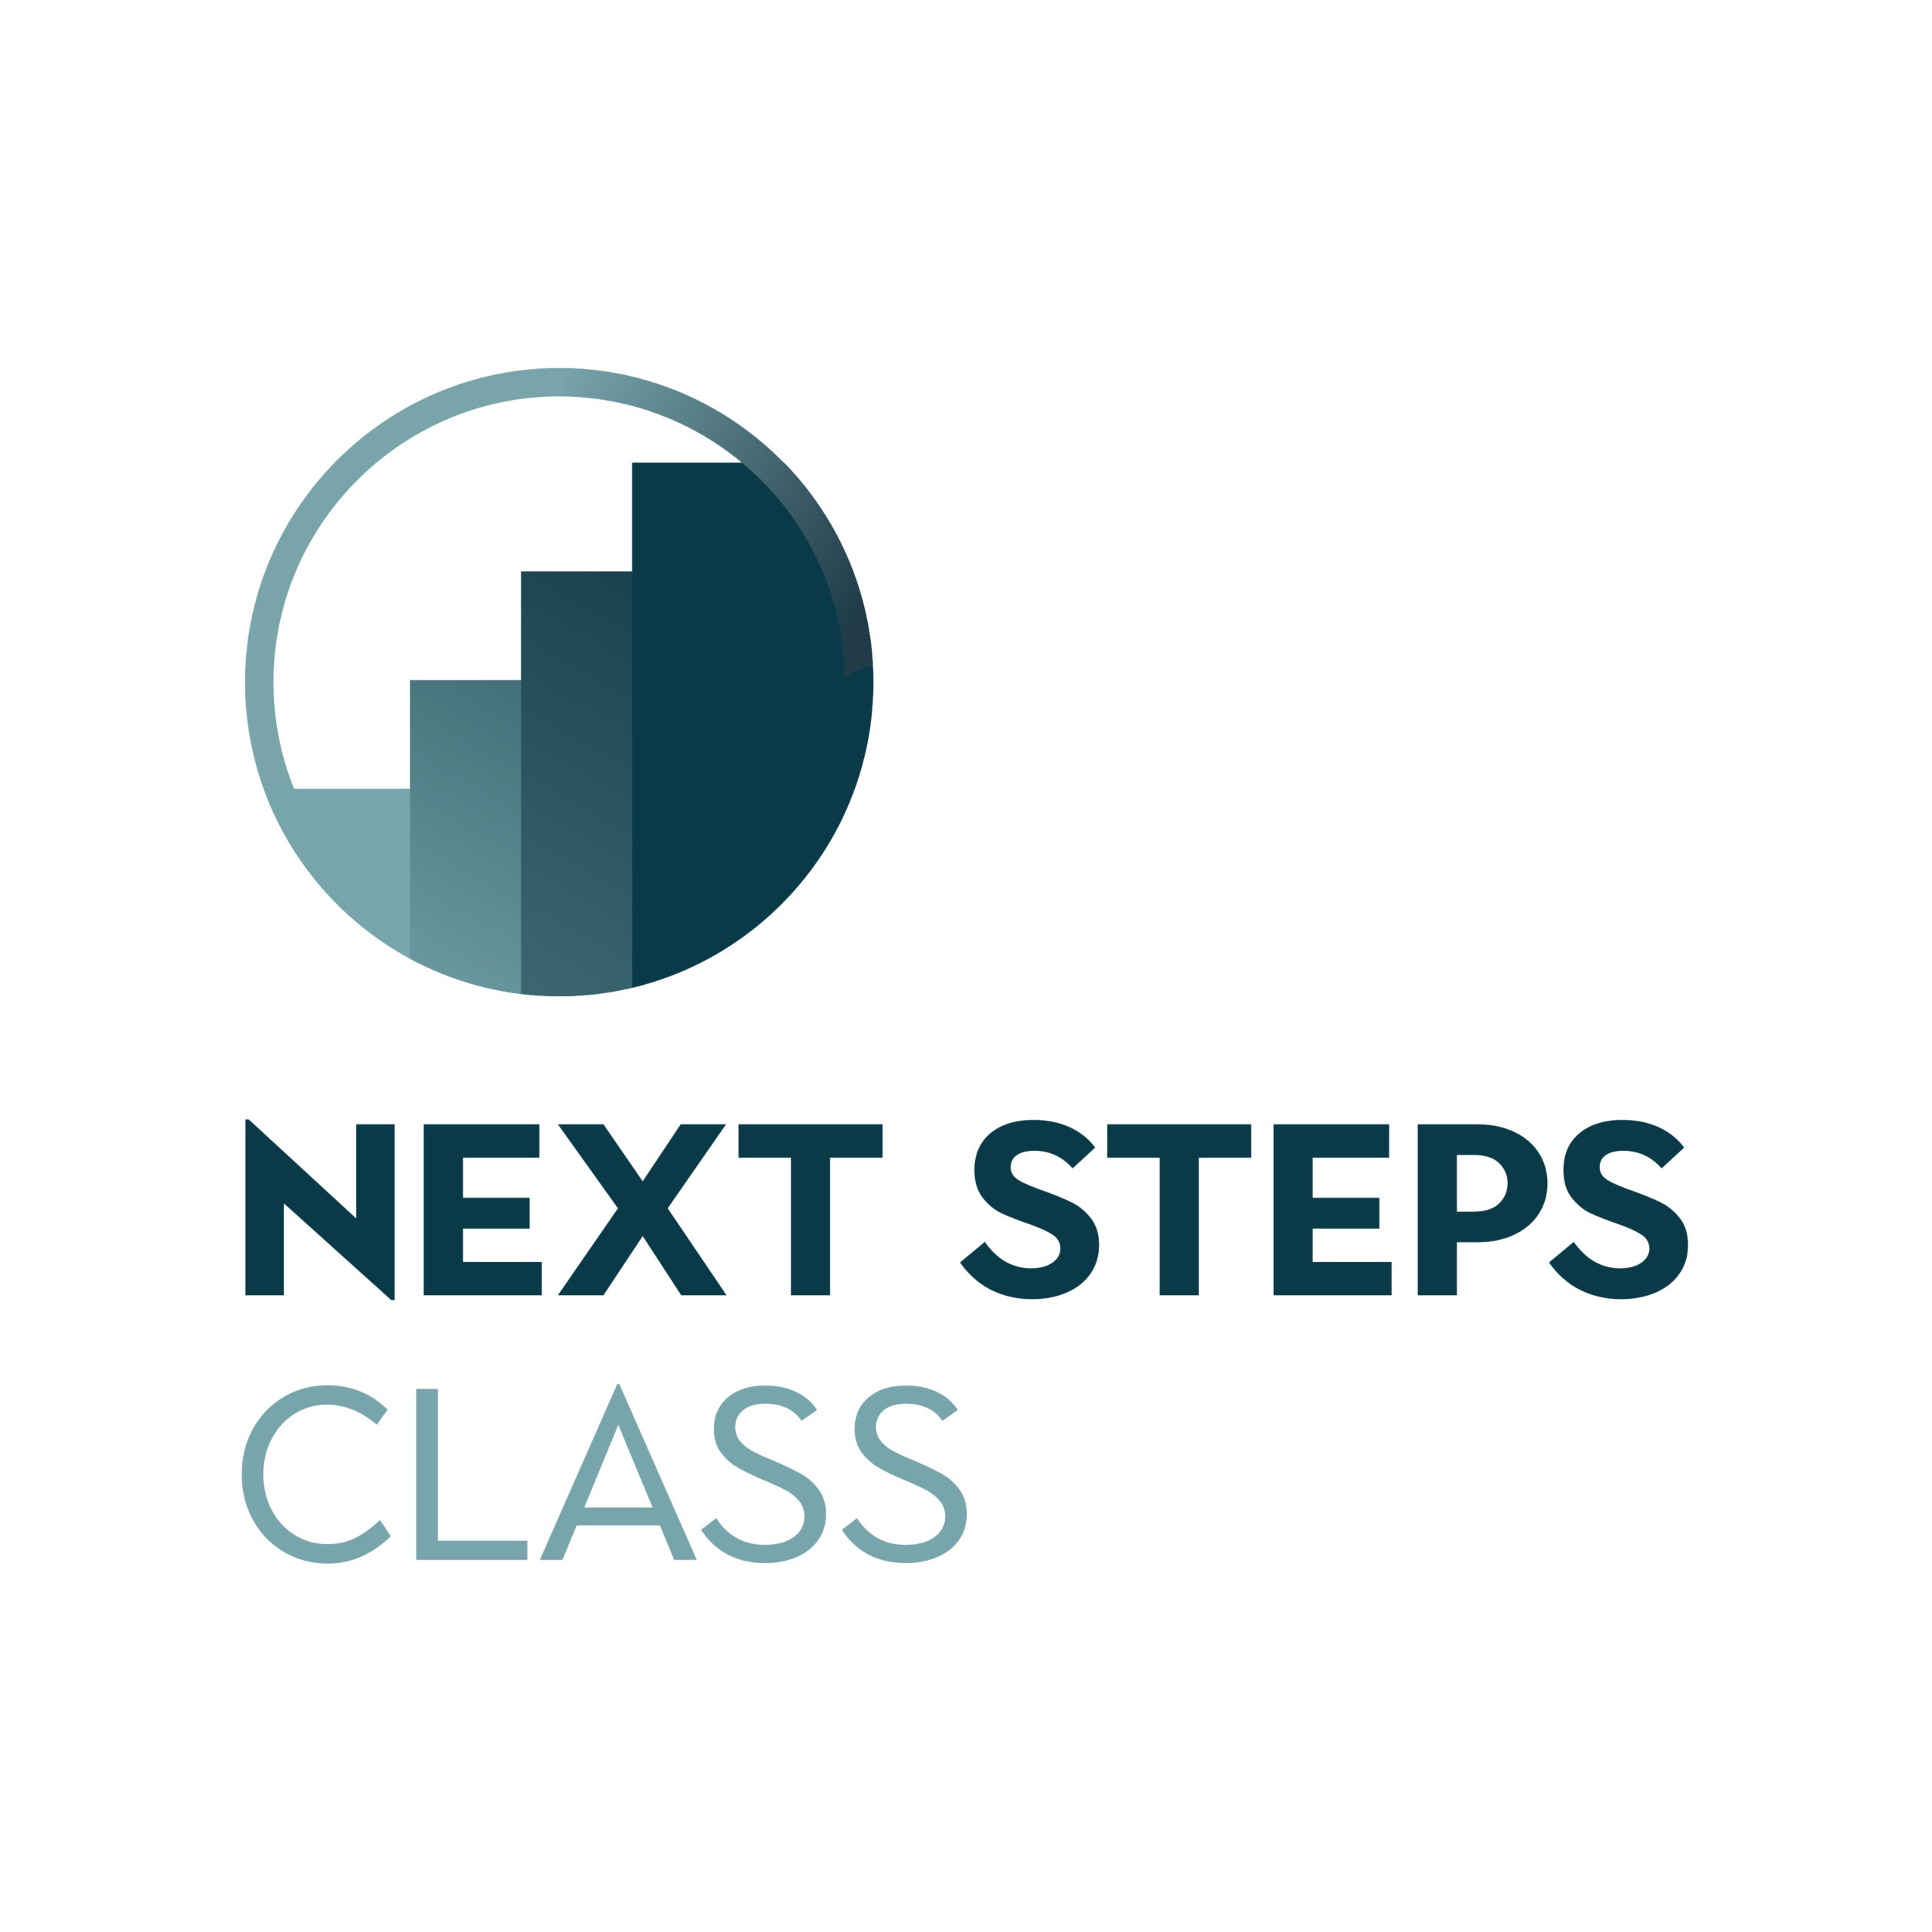 custom logo design for Next Steps Class with teal gradient steps within a circle as an icon